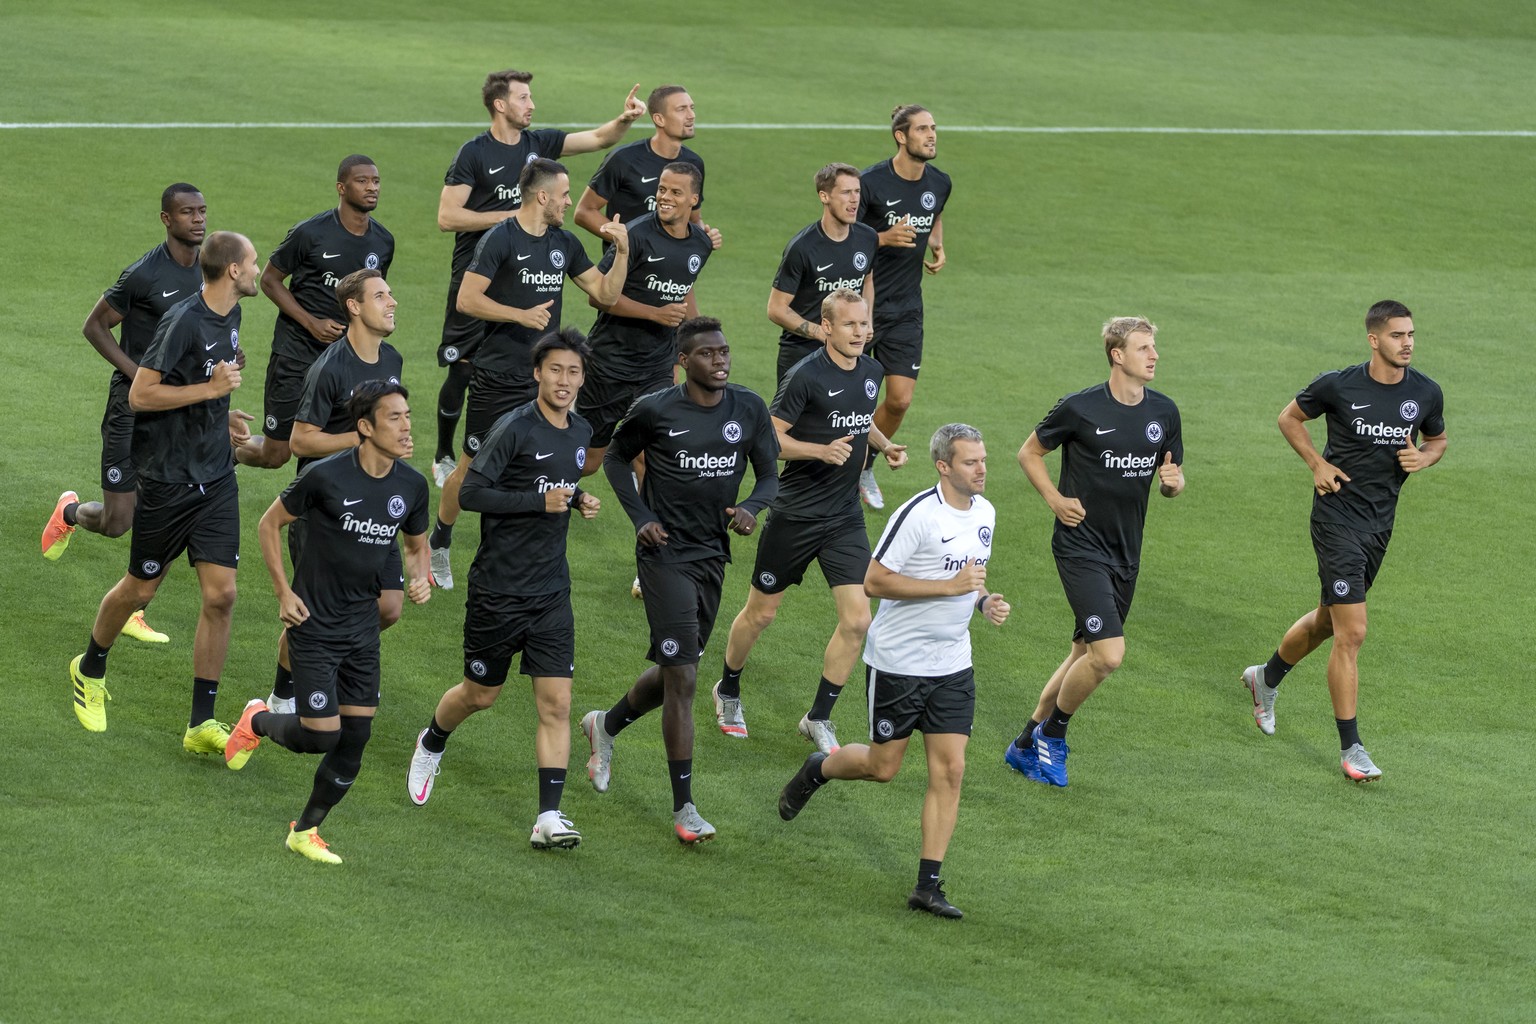 epa08585830 Eintracht Frankfurt players go through their warm-up routine during a training session at St. Jakob-Park stadium in Basel, Switzerland, 05 August 2020. Frankfurt faces FC Basel 1893 on 06  ...